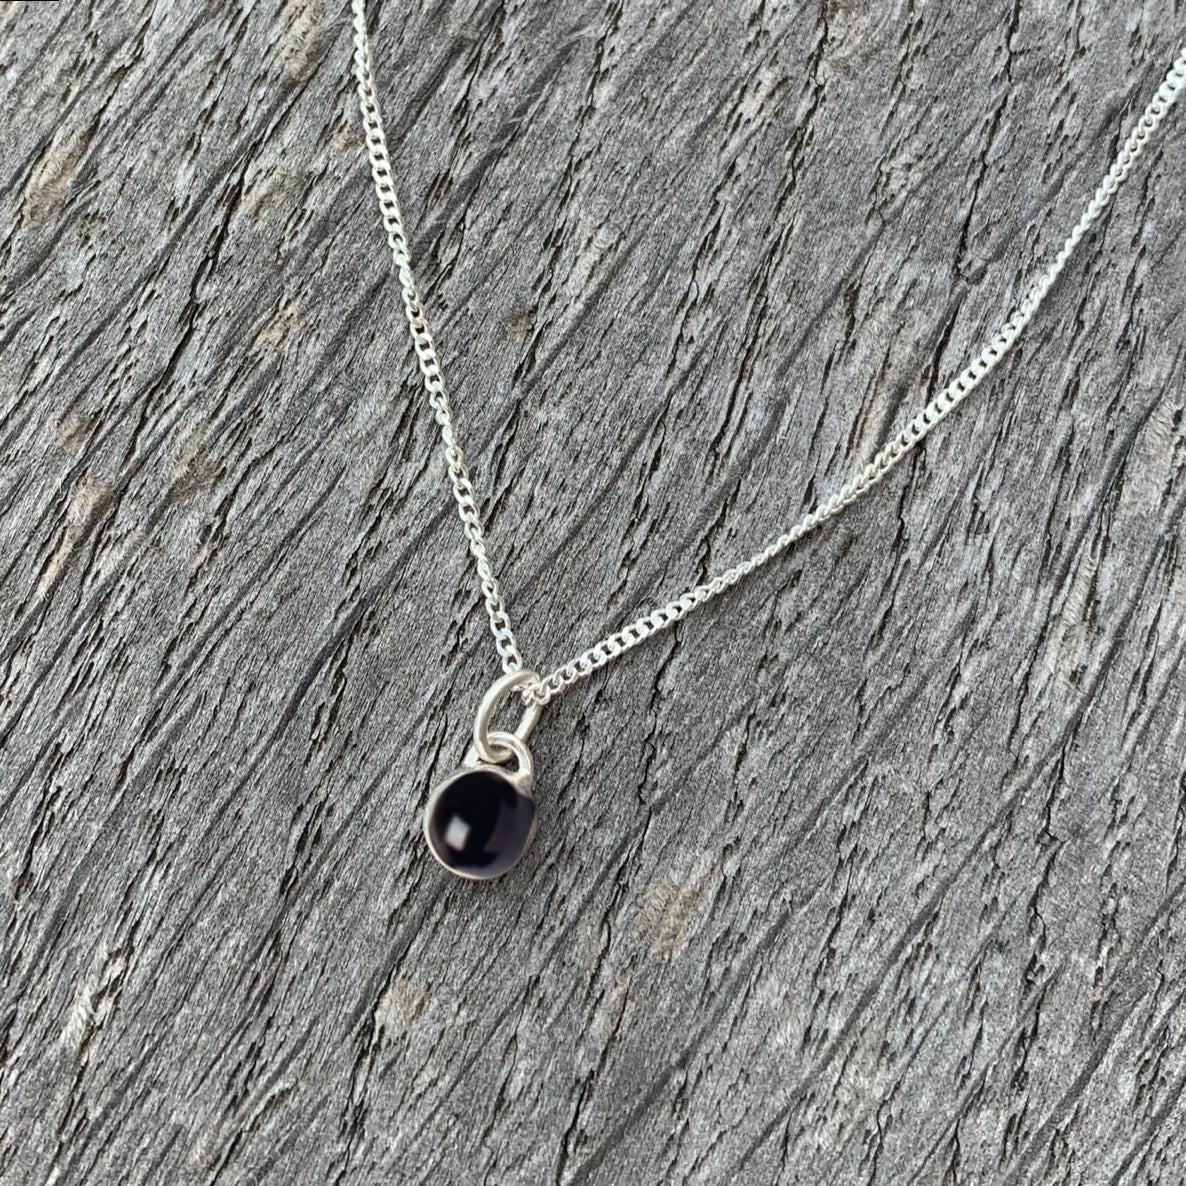 A black onyx stone set in silver on a sterling silver chain.